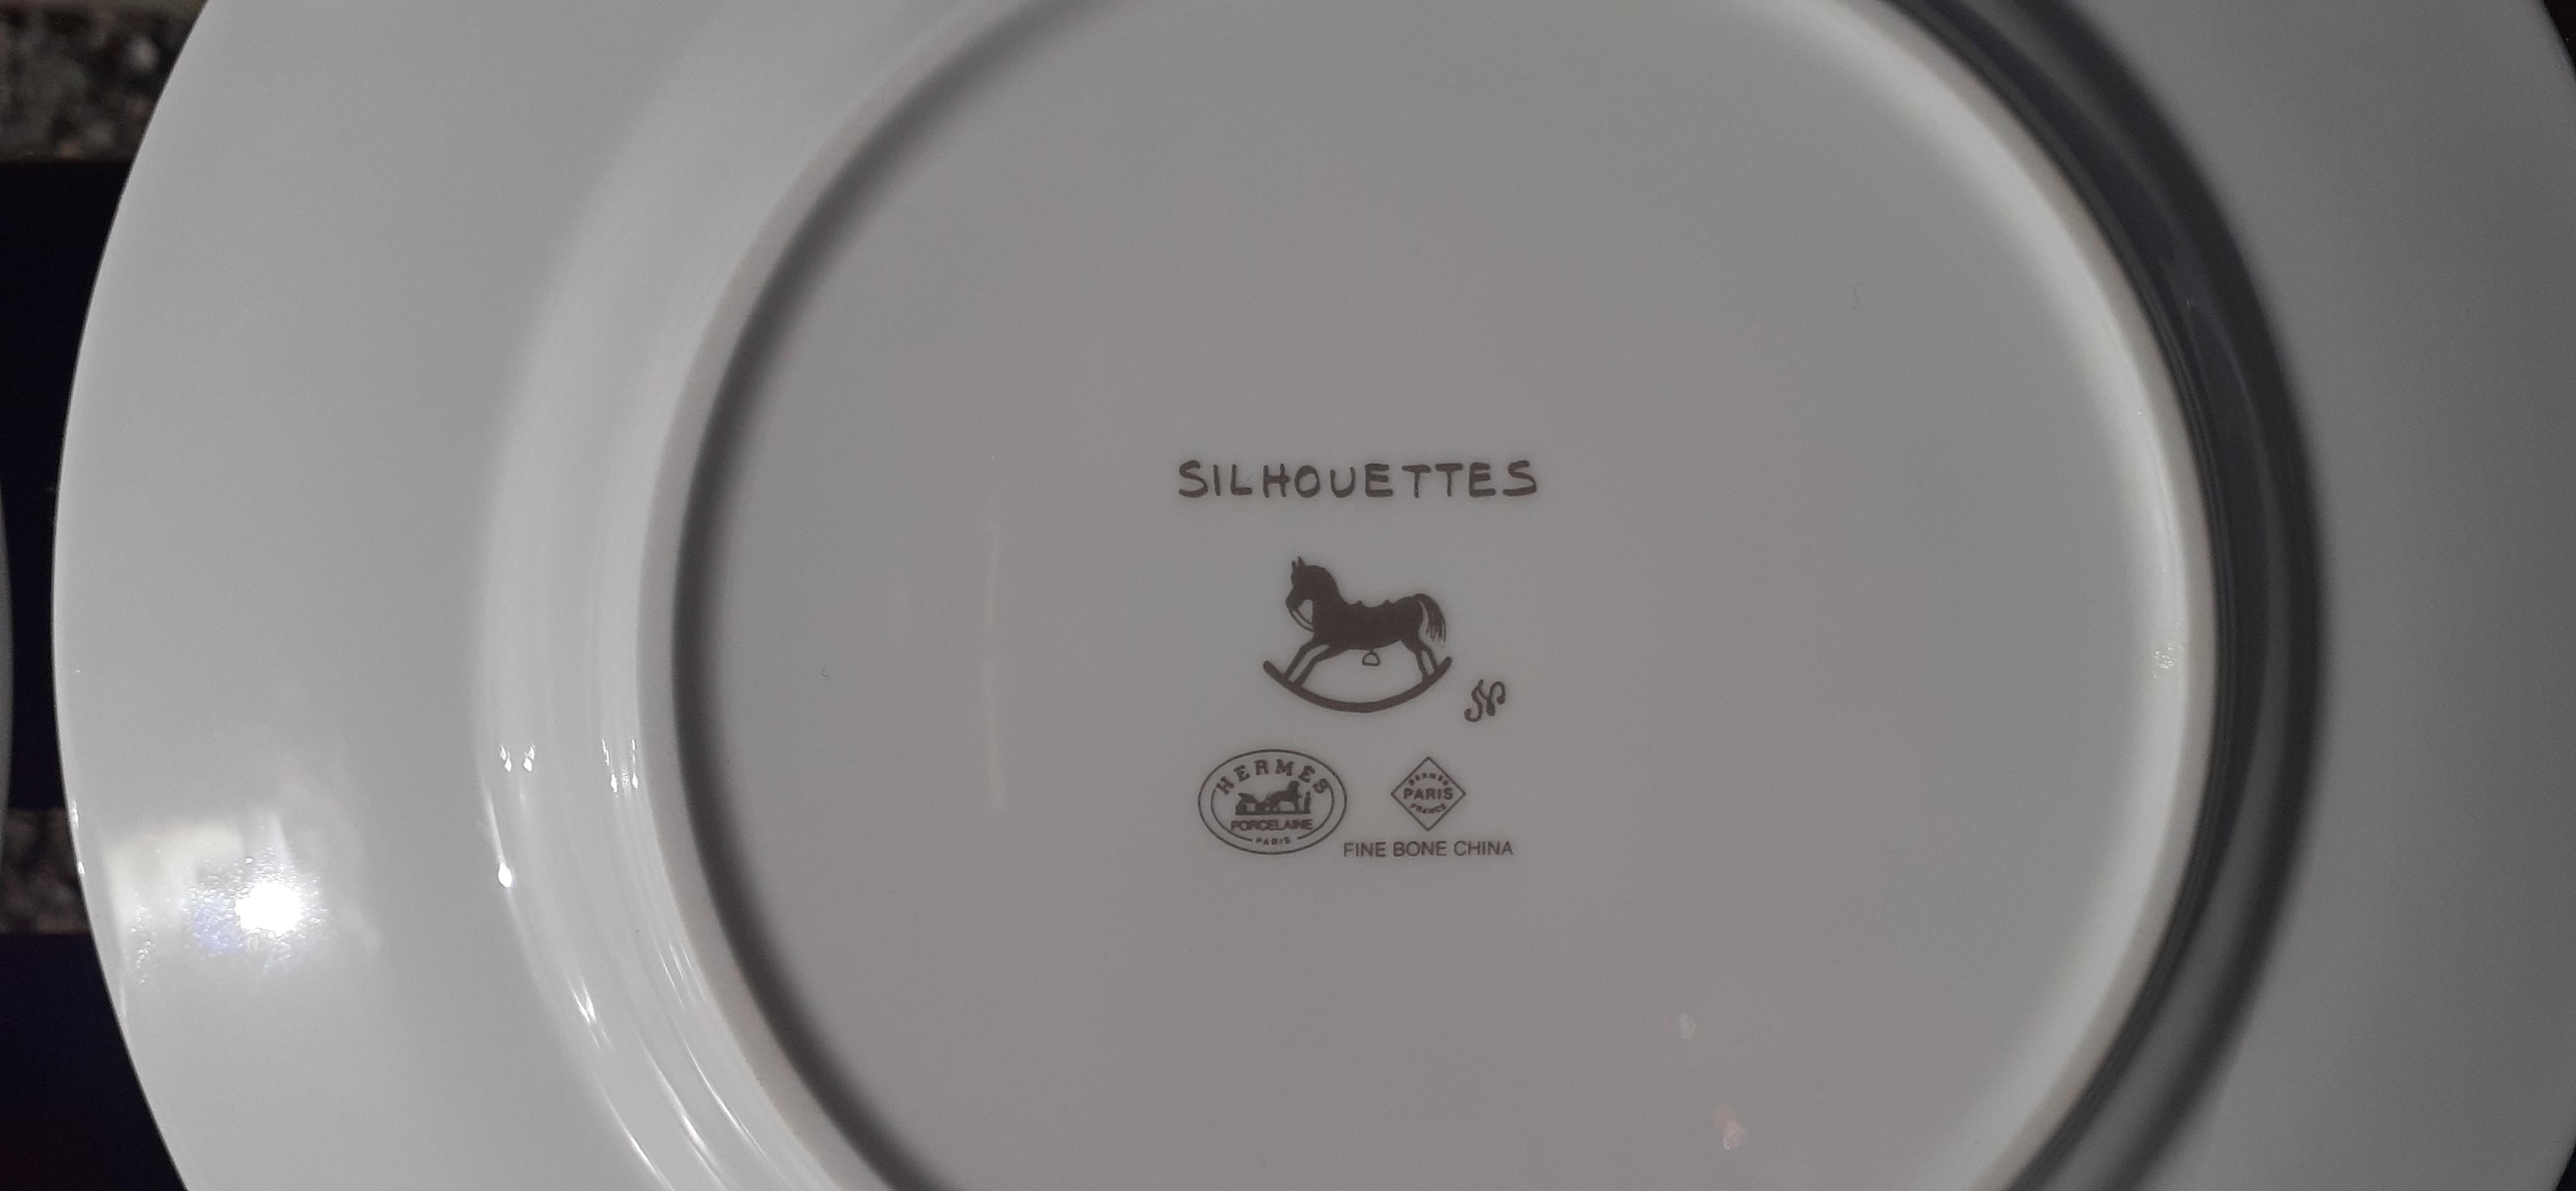 Hermès Set of 2 Plates Sihouettes Collection  For Sale 3